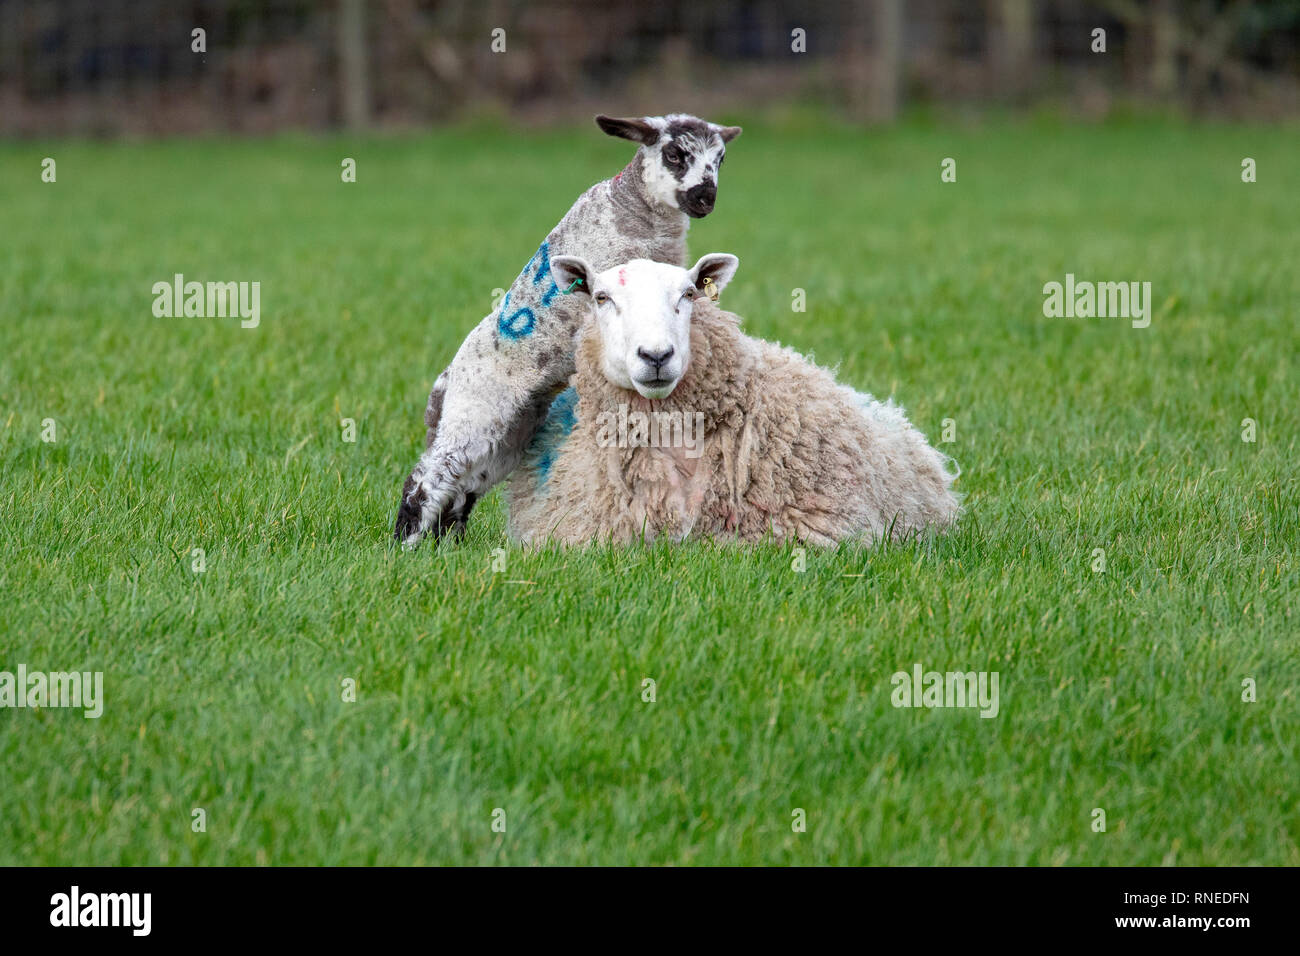 Flintshire, North, UK. 19th Feb, 2019. UK Weather: Cool conditions in the foothills of rural Flintshire as these new born lamb discovered in the village of Lixwm playing on top of its mother Credit: DGDImages/Alamy Live News Stock Photo